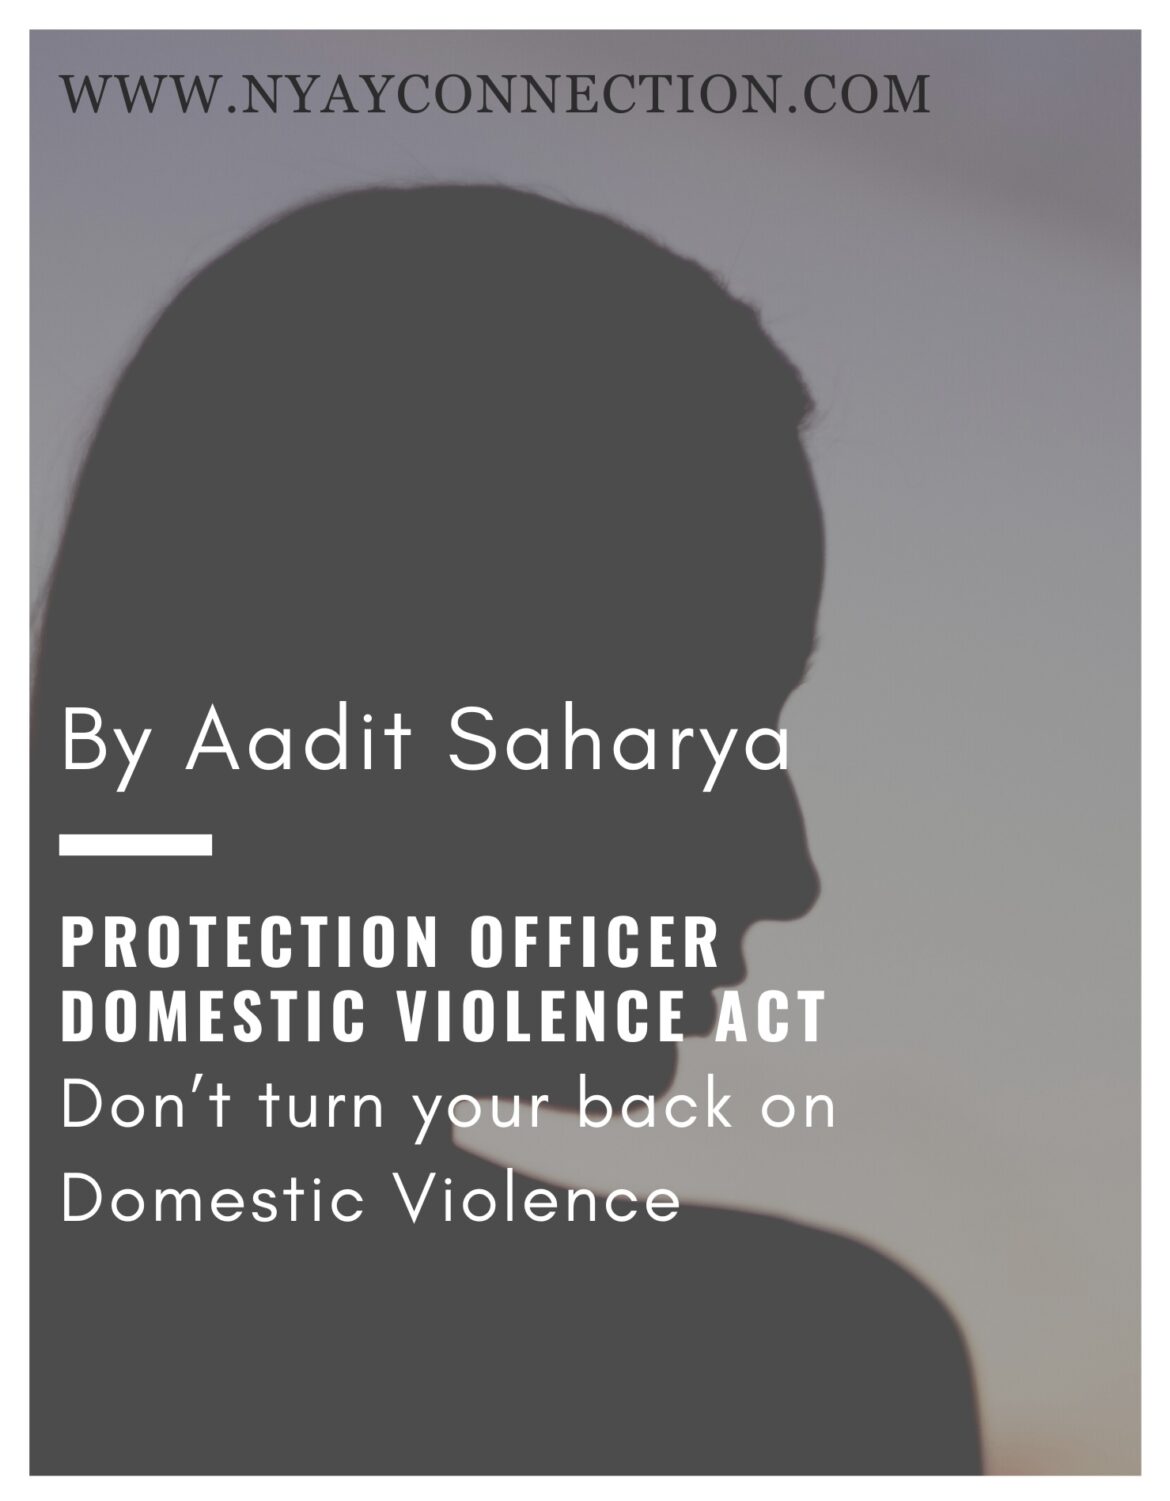 PROTECTION OFFICER UNDER THE DOMESTIC VIOLENCE ACT